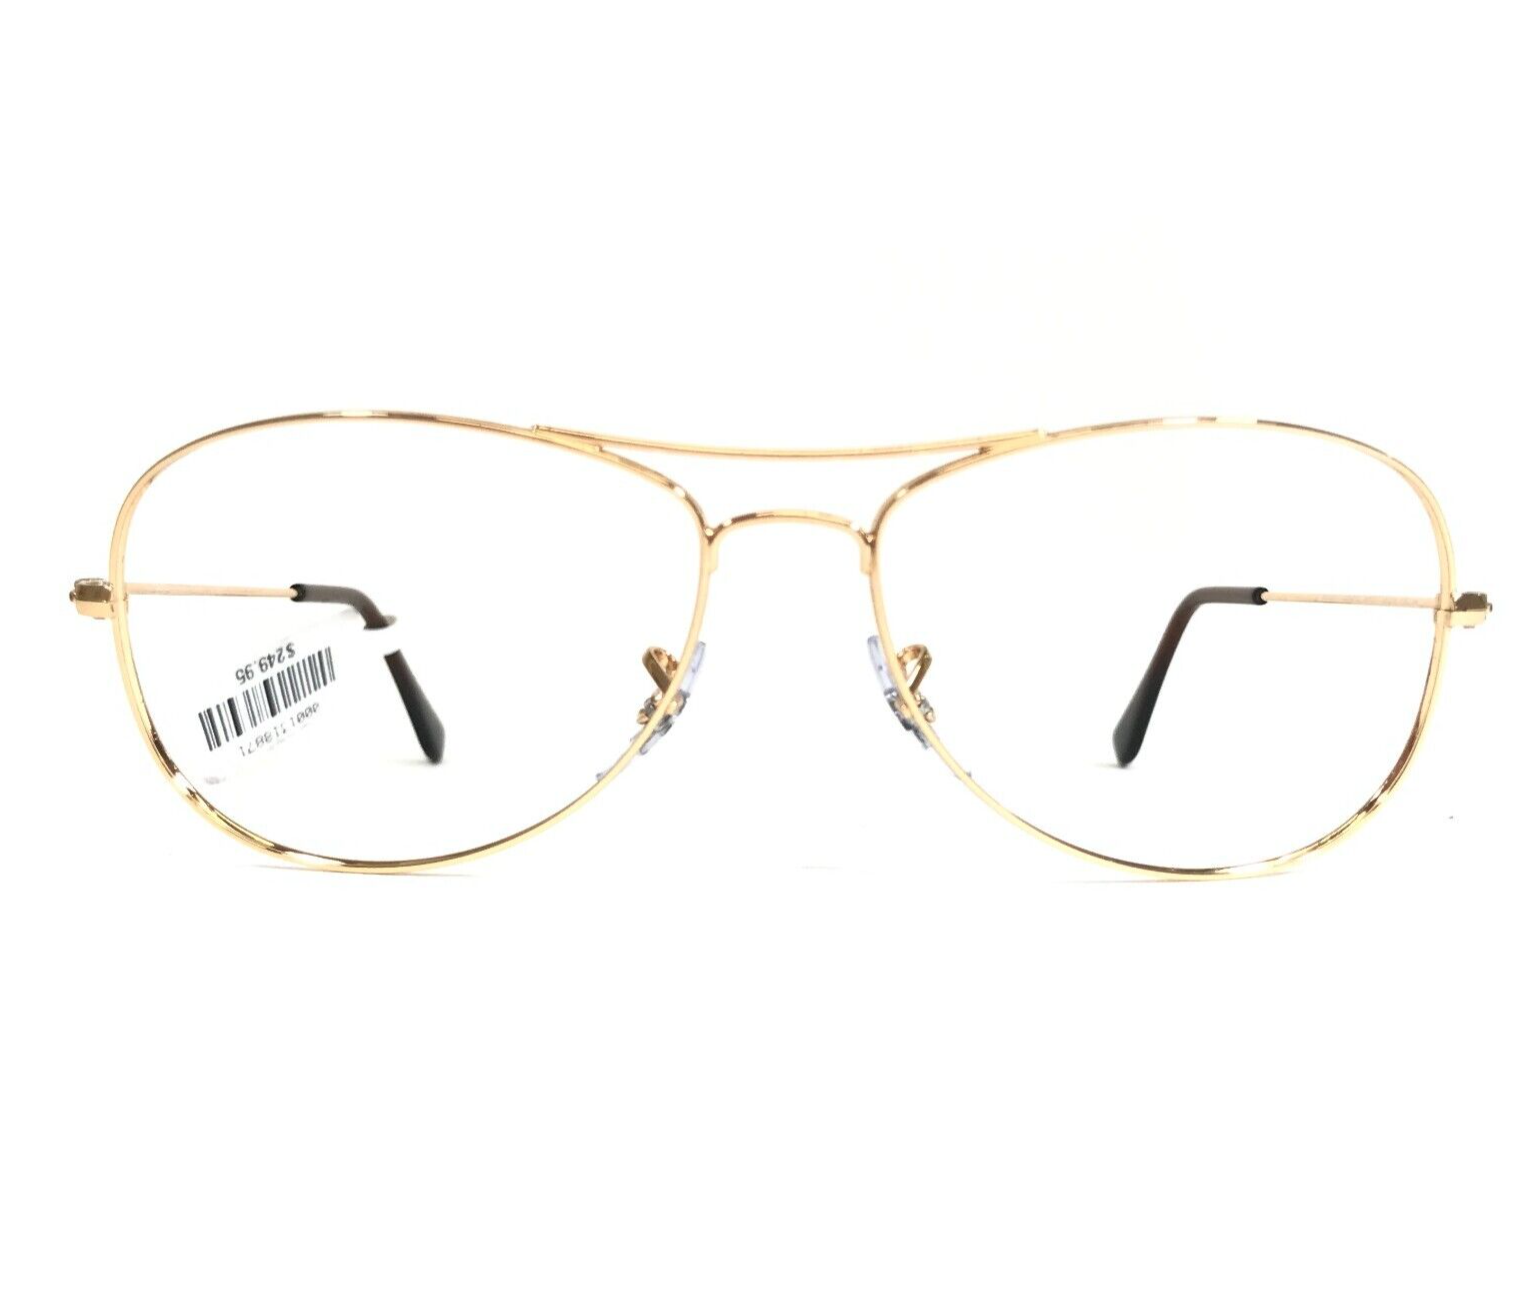 Primary image for Ray-Ban Sonnenbrille Rahmen Rb3362 Cockpit 001/51 Gold Voll Draht Rim 56-14-135